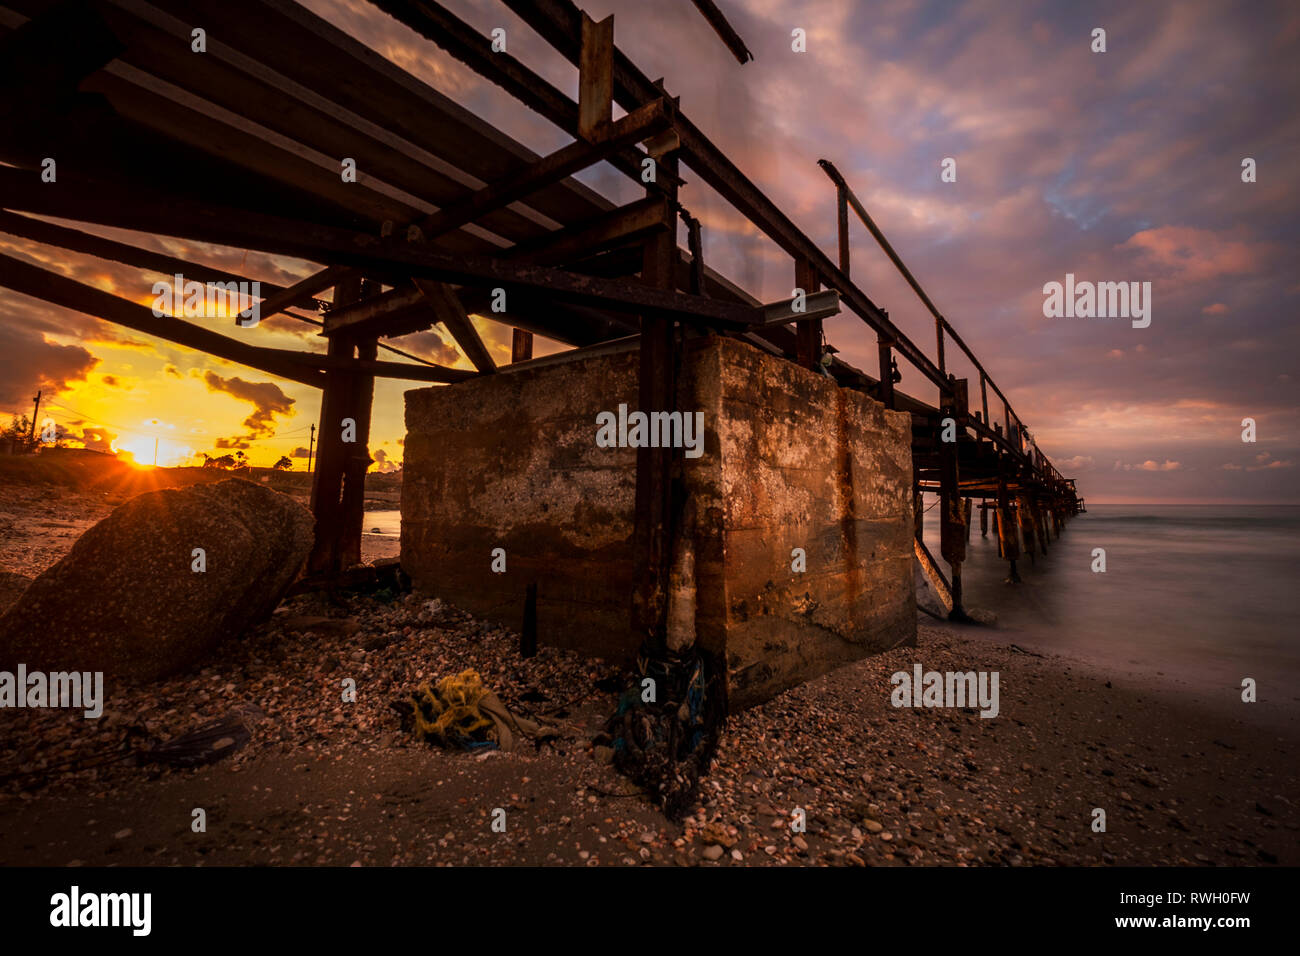 Page 2 - Atlit High Resolution Stock Photography and Images - Alamy